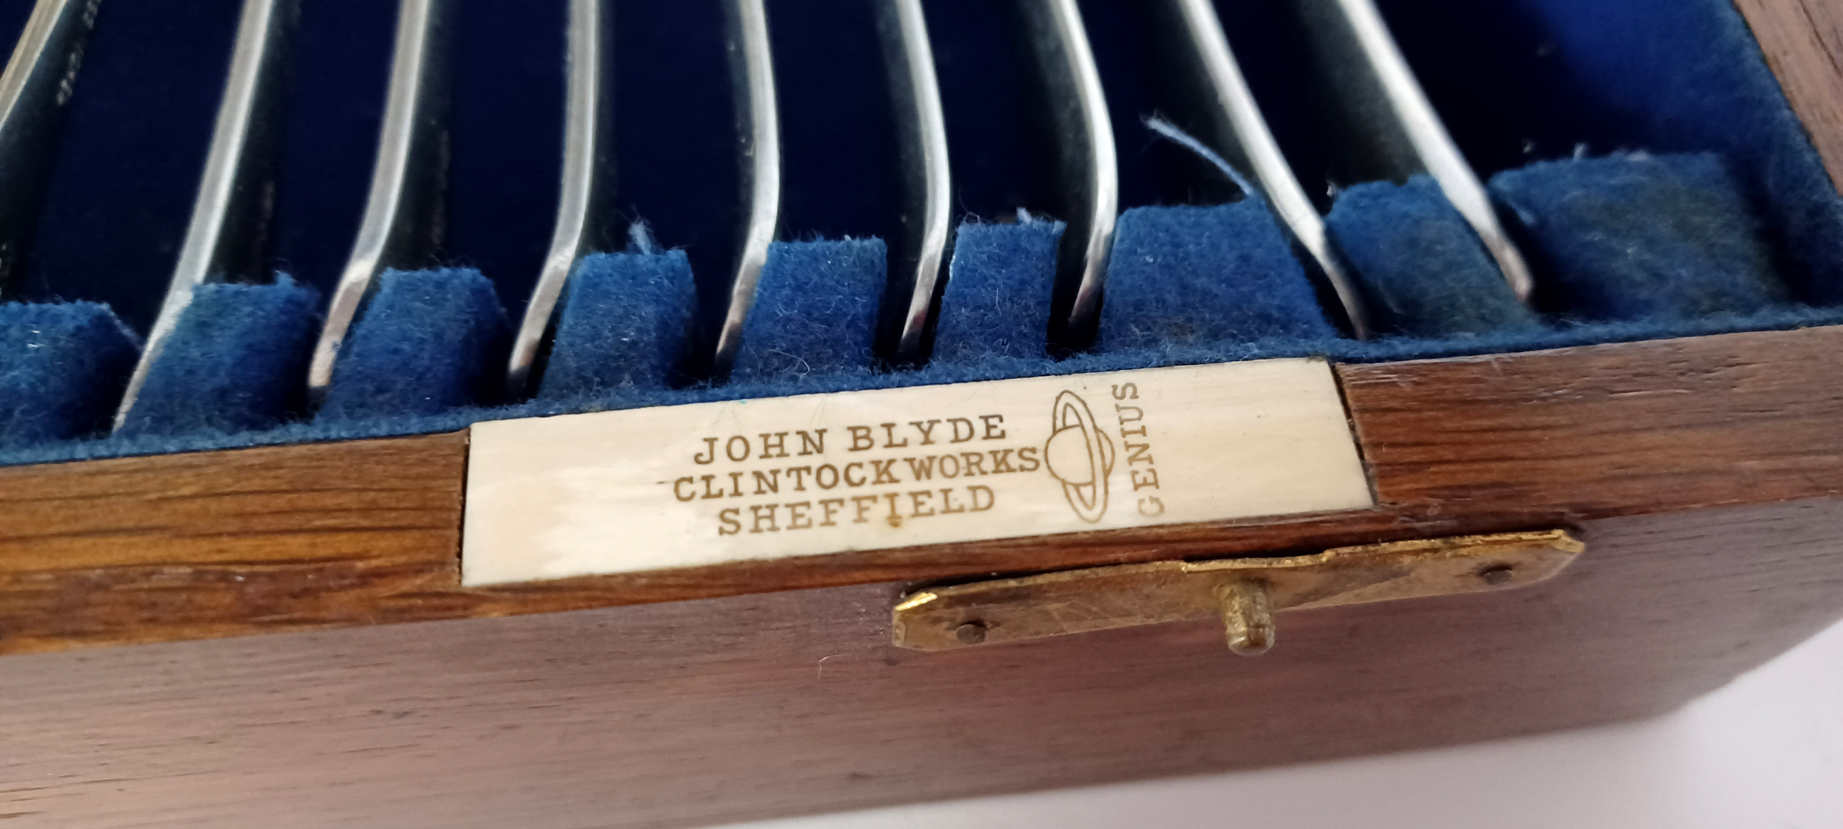 JOHN BLYDE CLINTOCK WORKS SHEFFIELD STAINLESS 50 PIECES GOOD QUALITY CUTLERY SET IN OAK CASE - Image 3 of 3